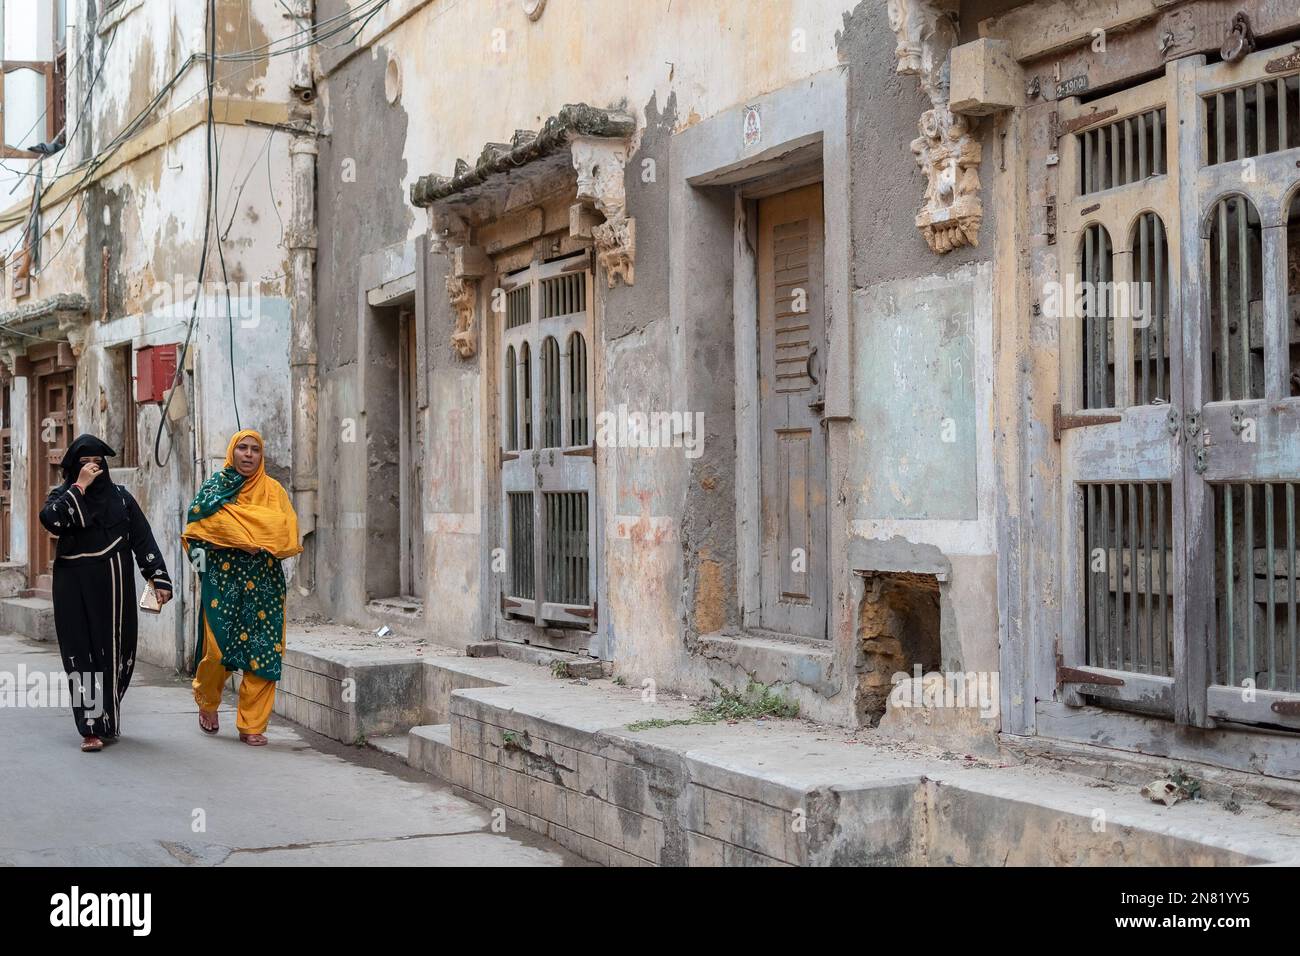 Diu, India - December 2018: Two Indian women walking past old vintage houses in the island town of Diu. Stock Photo